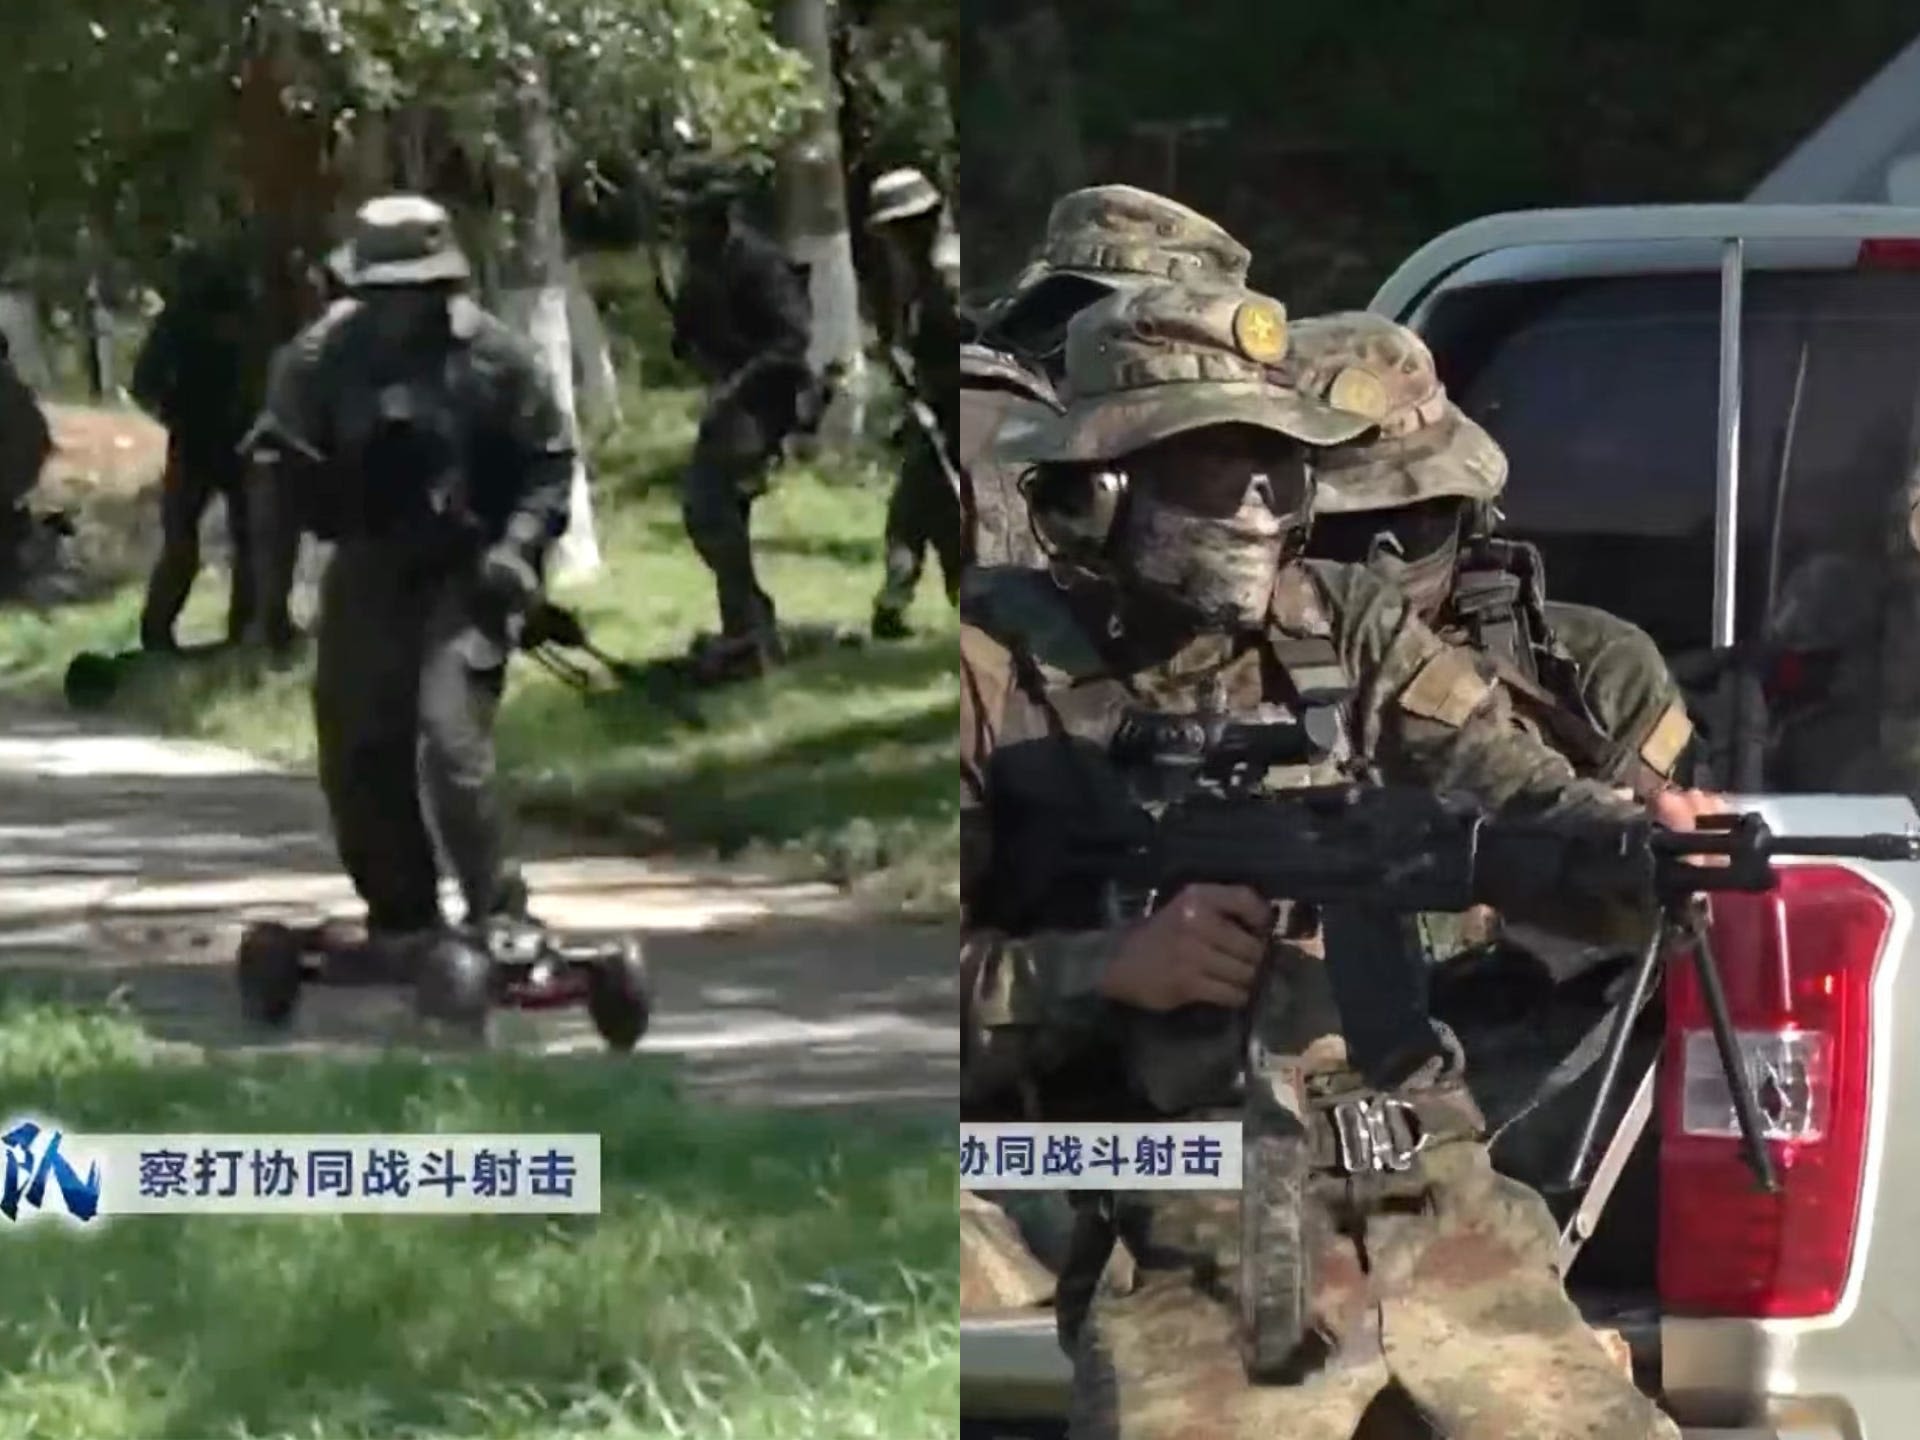 China's naval commandos rode electric skateboards into a combat exercise with drones disguised as birds, then left in a pickup truck